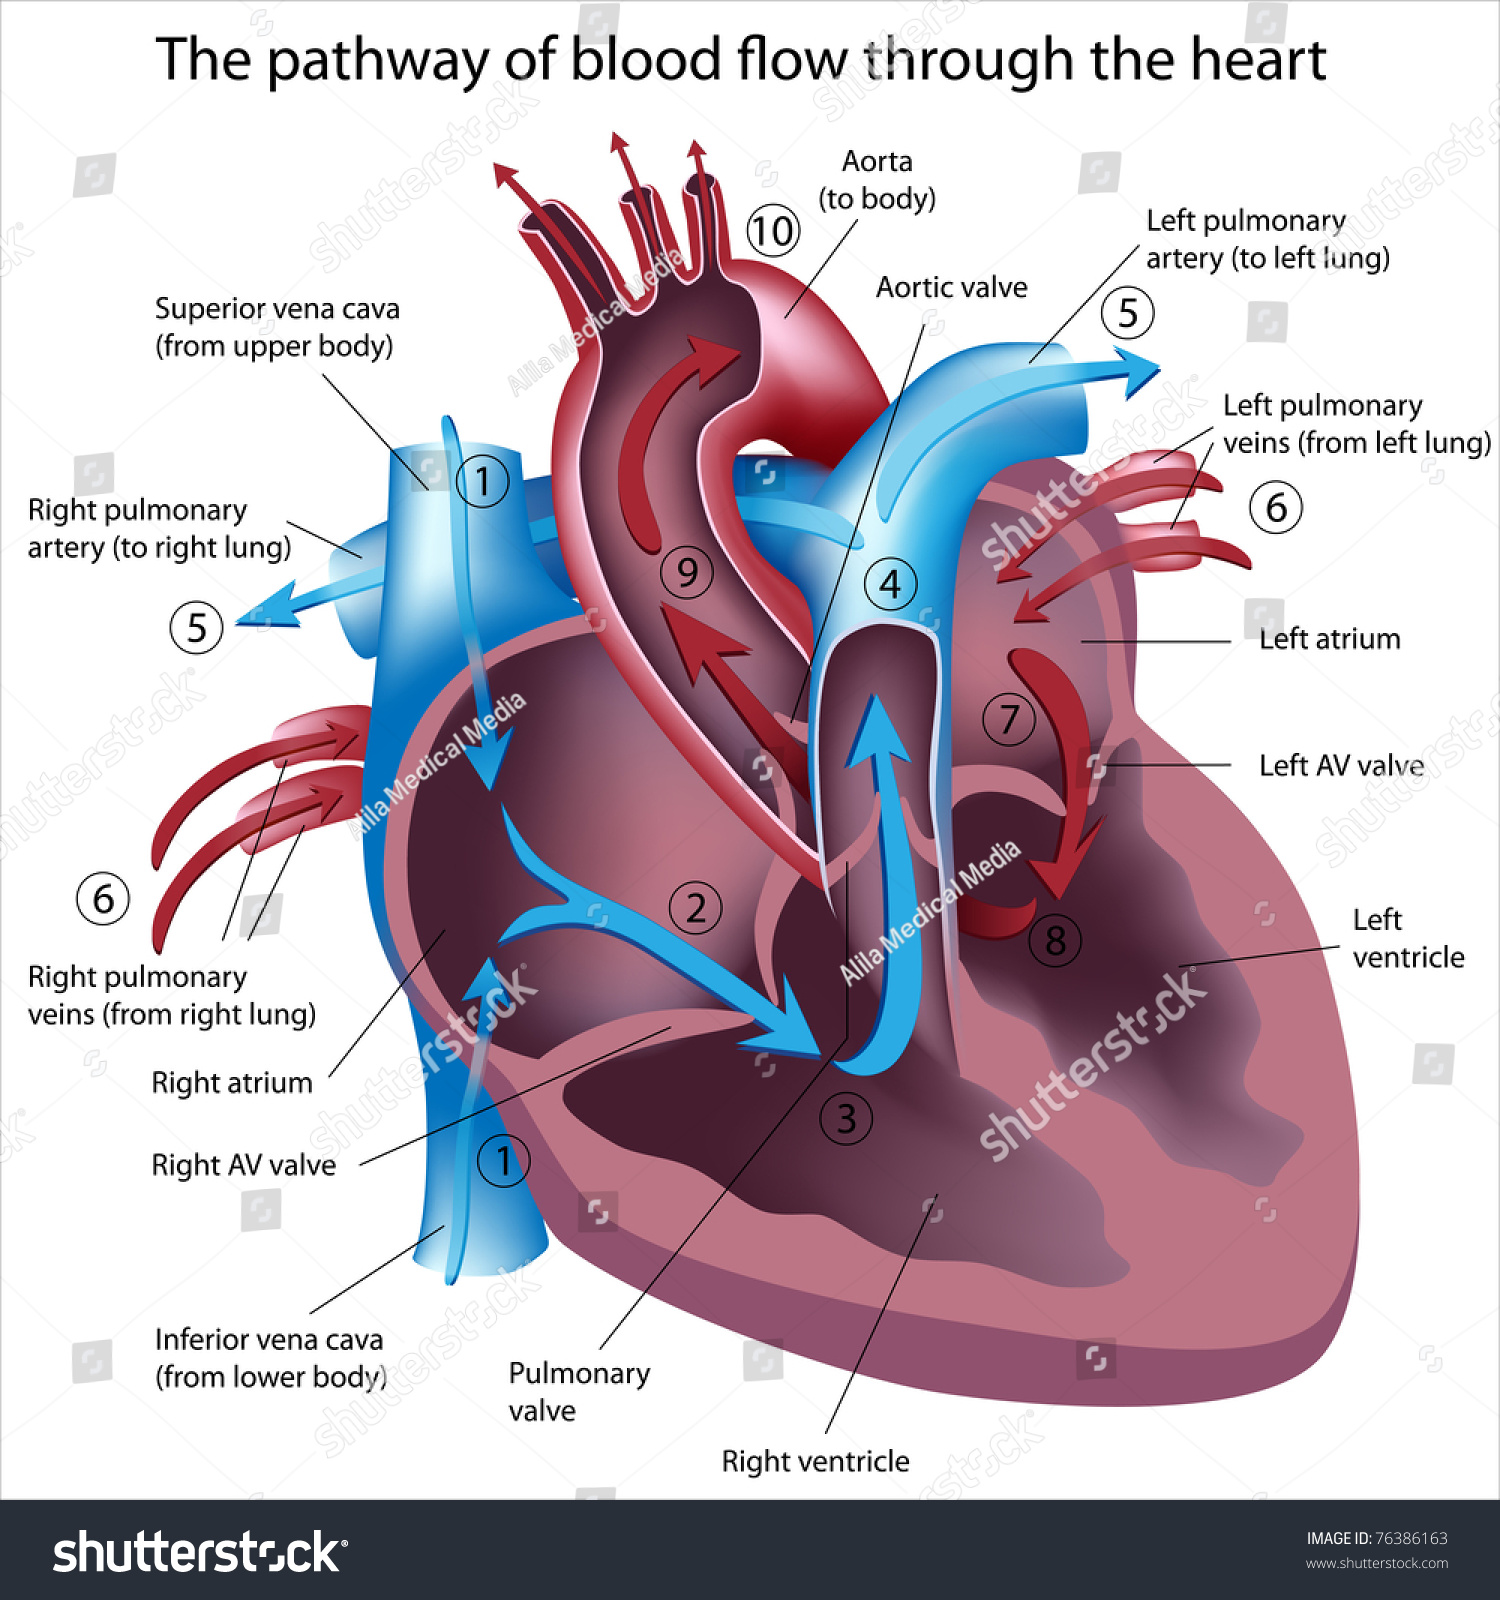 How does blood flow through the heart?